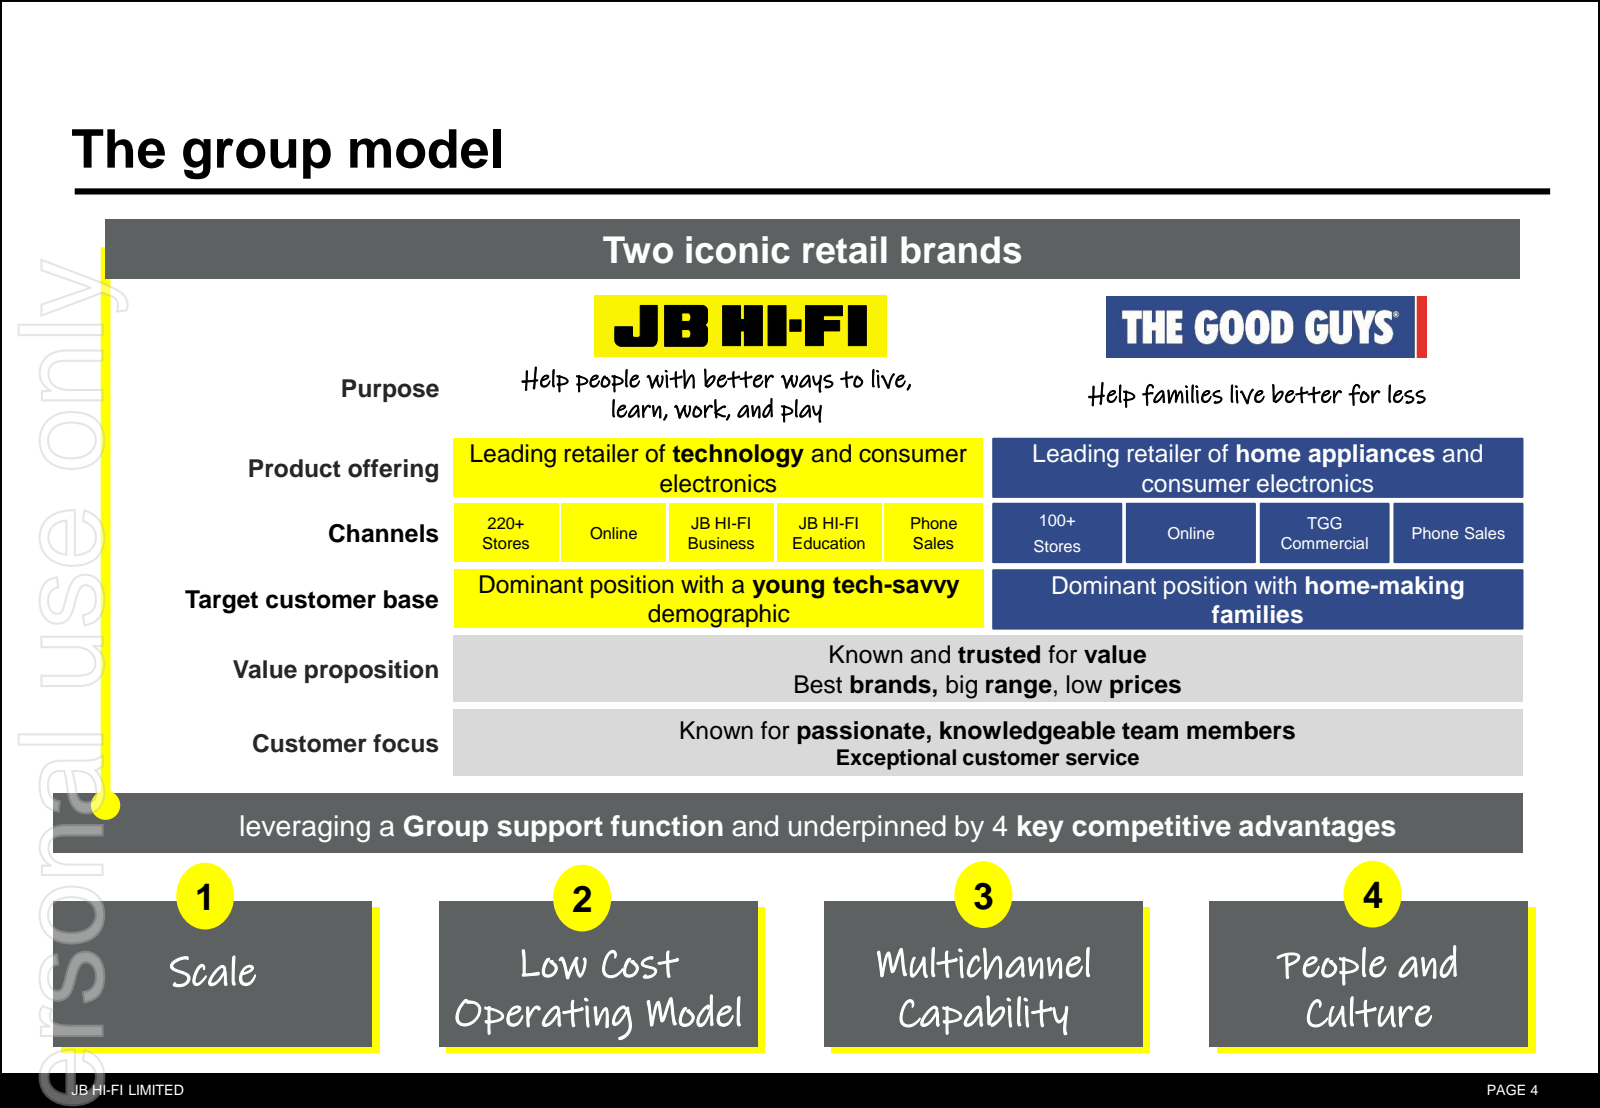 The group model 

uo